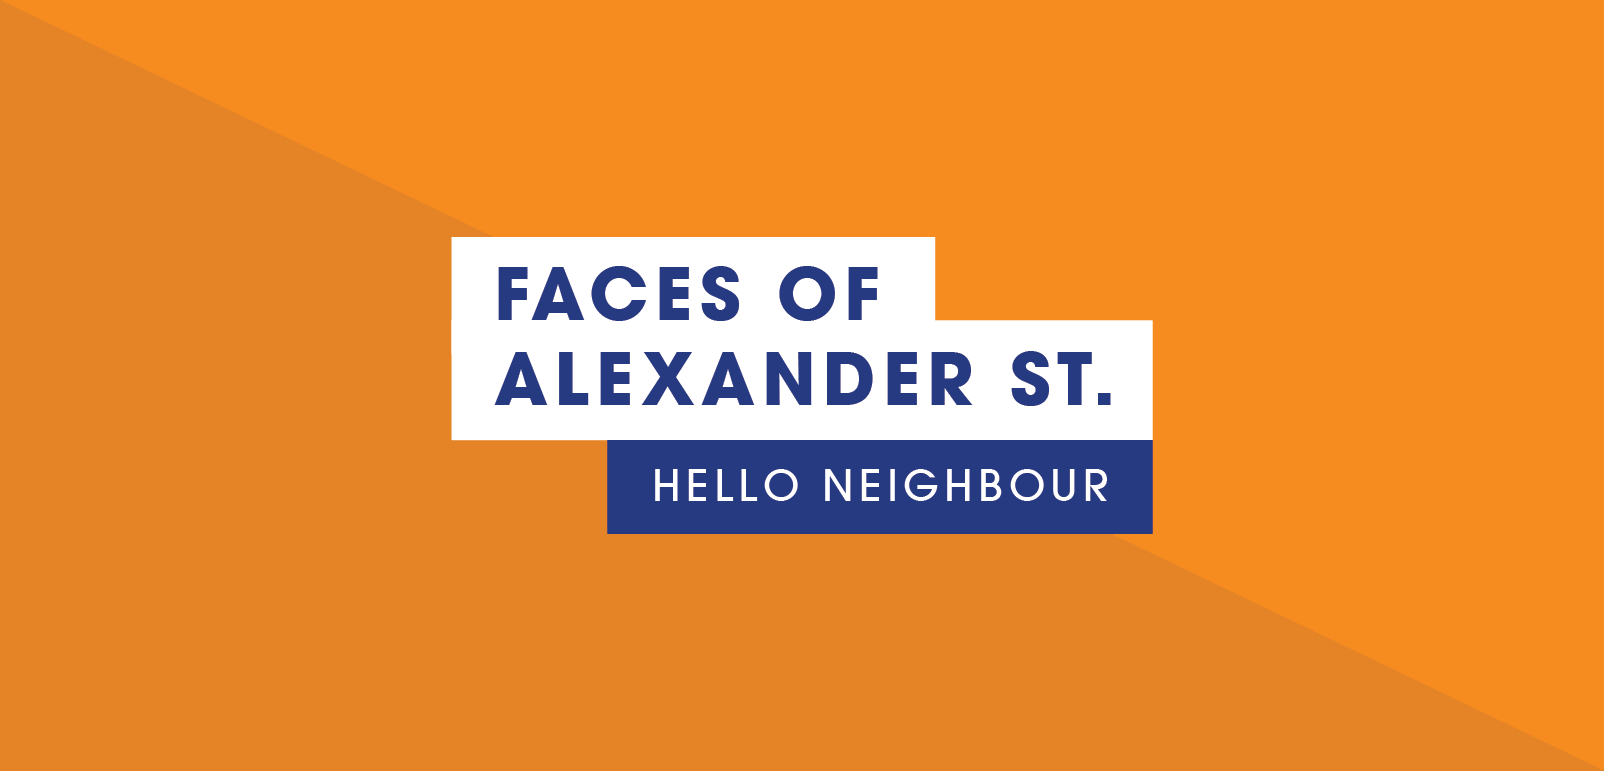 Faces of Alexander St.